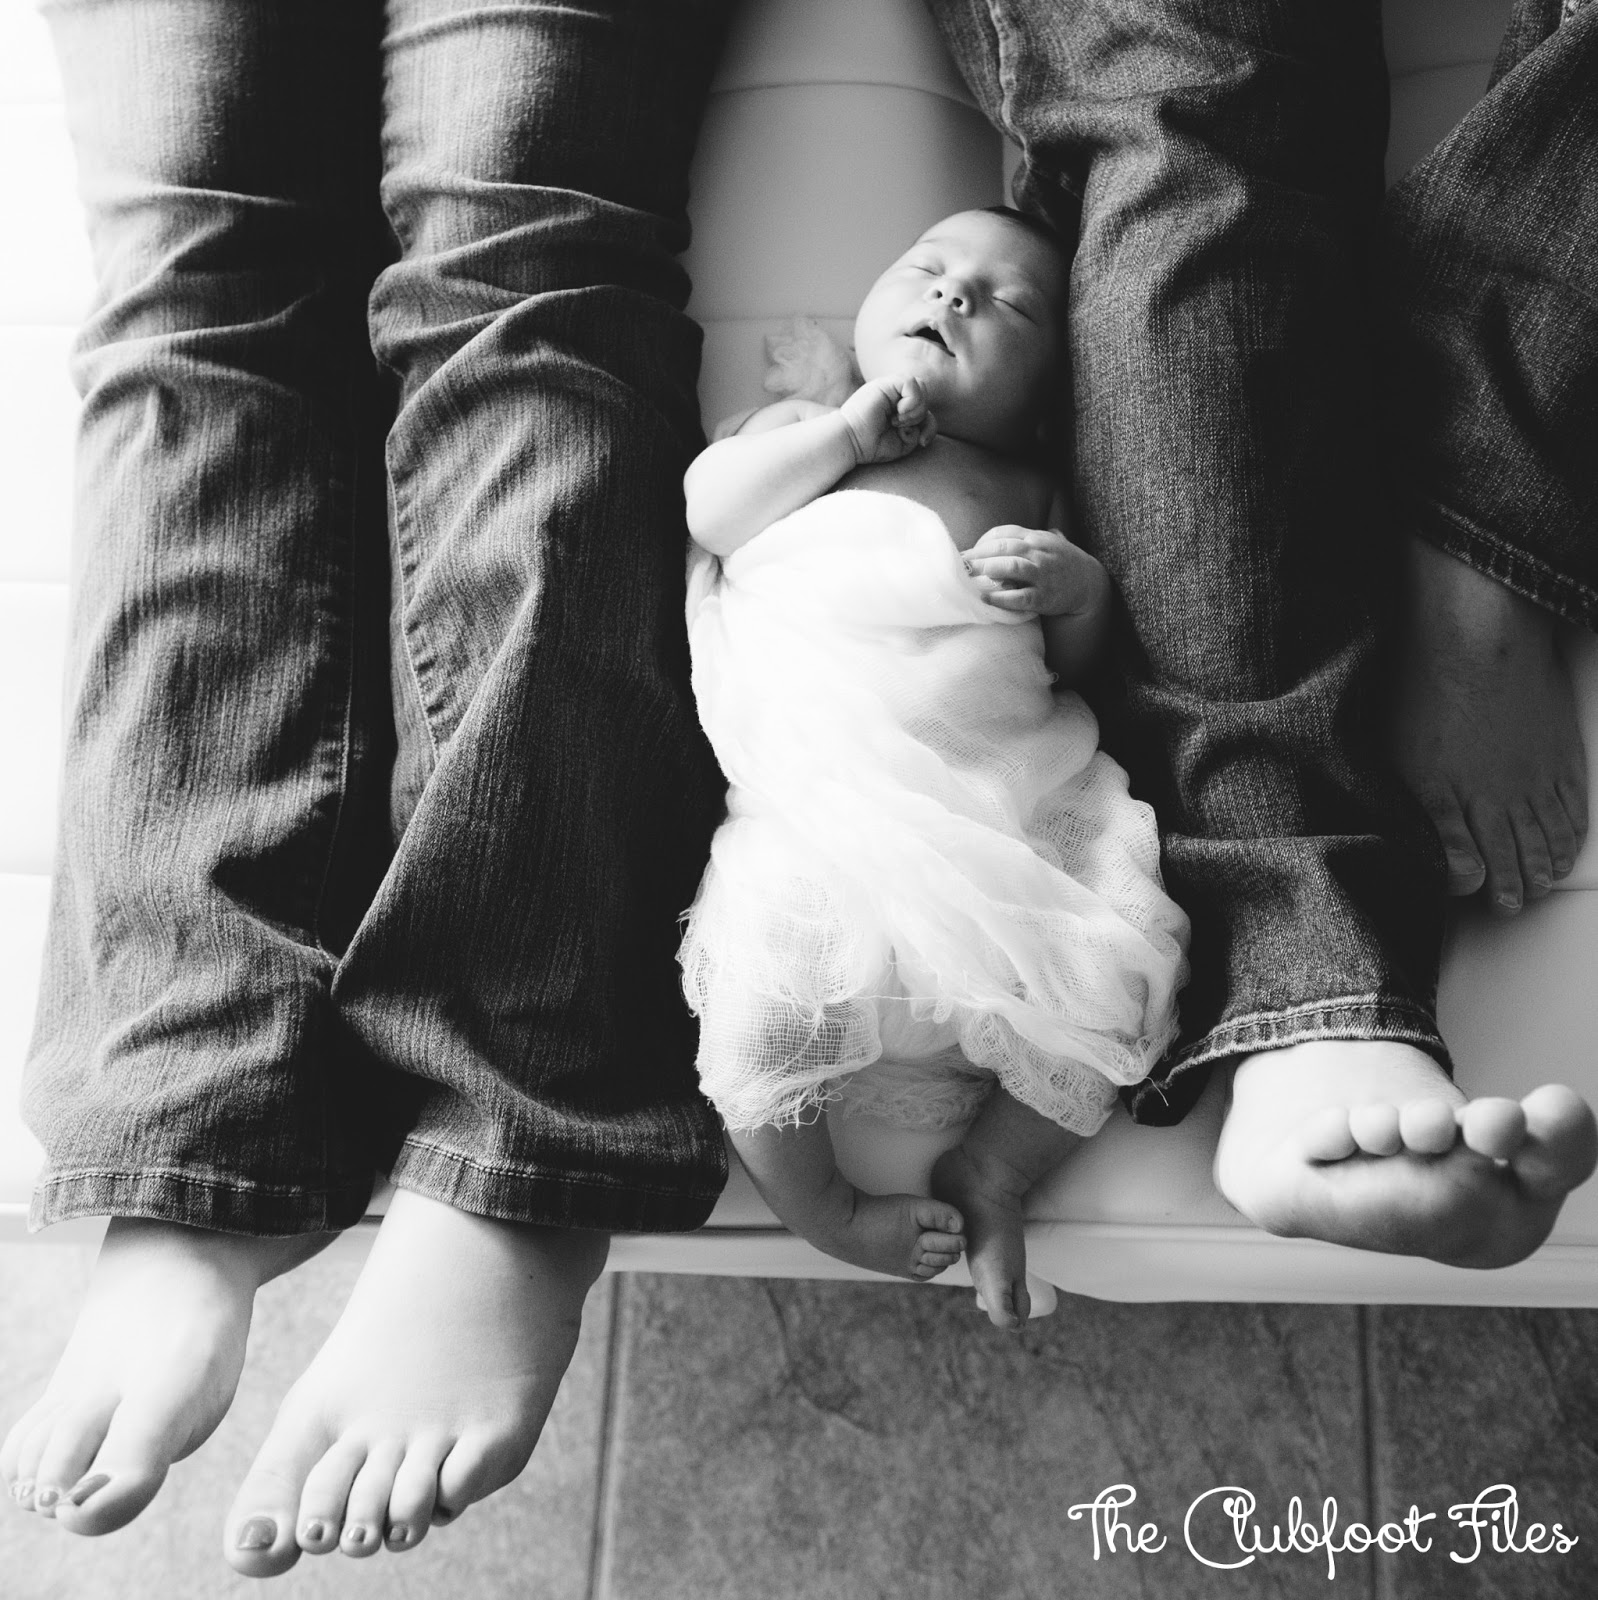 A Peachtree City Life Clubfoot Files